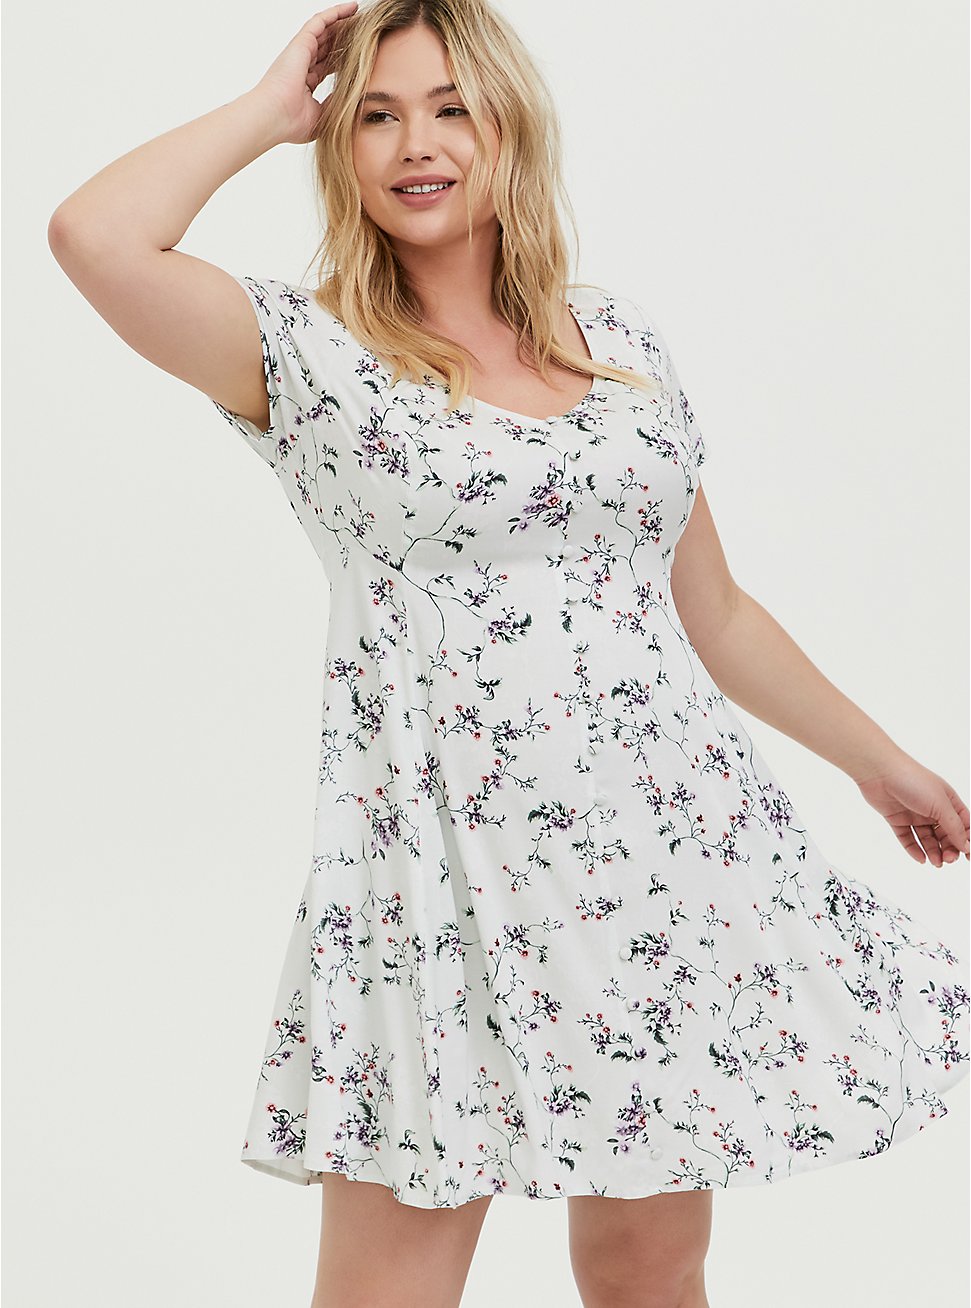 NEW Simply Be Ivory Floral Print Sweetheart Skater Dress 28 30 32